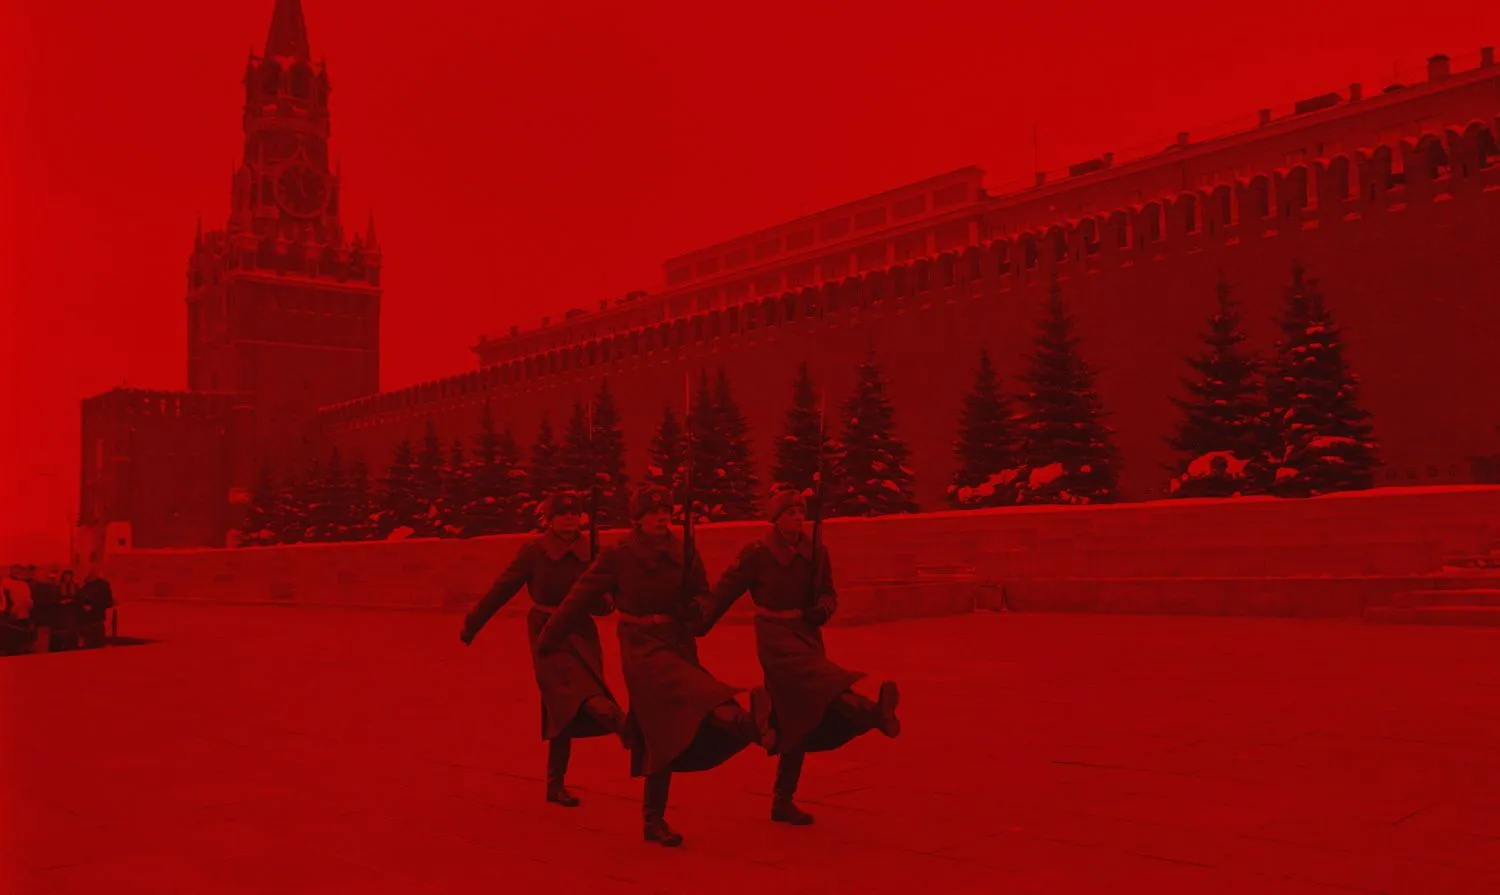 Soldiers in front of the Kremlin